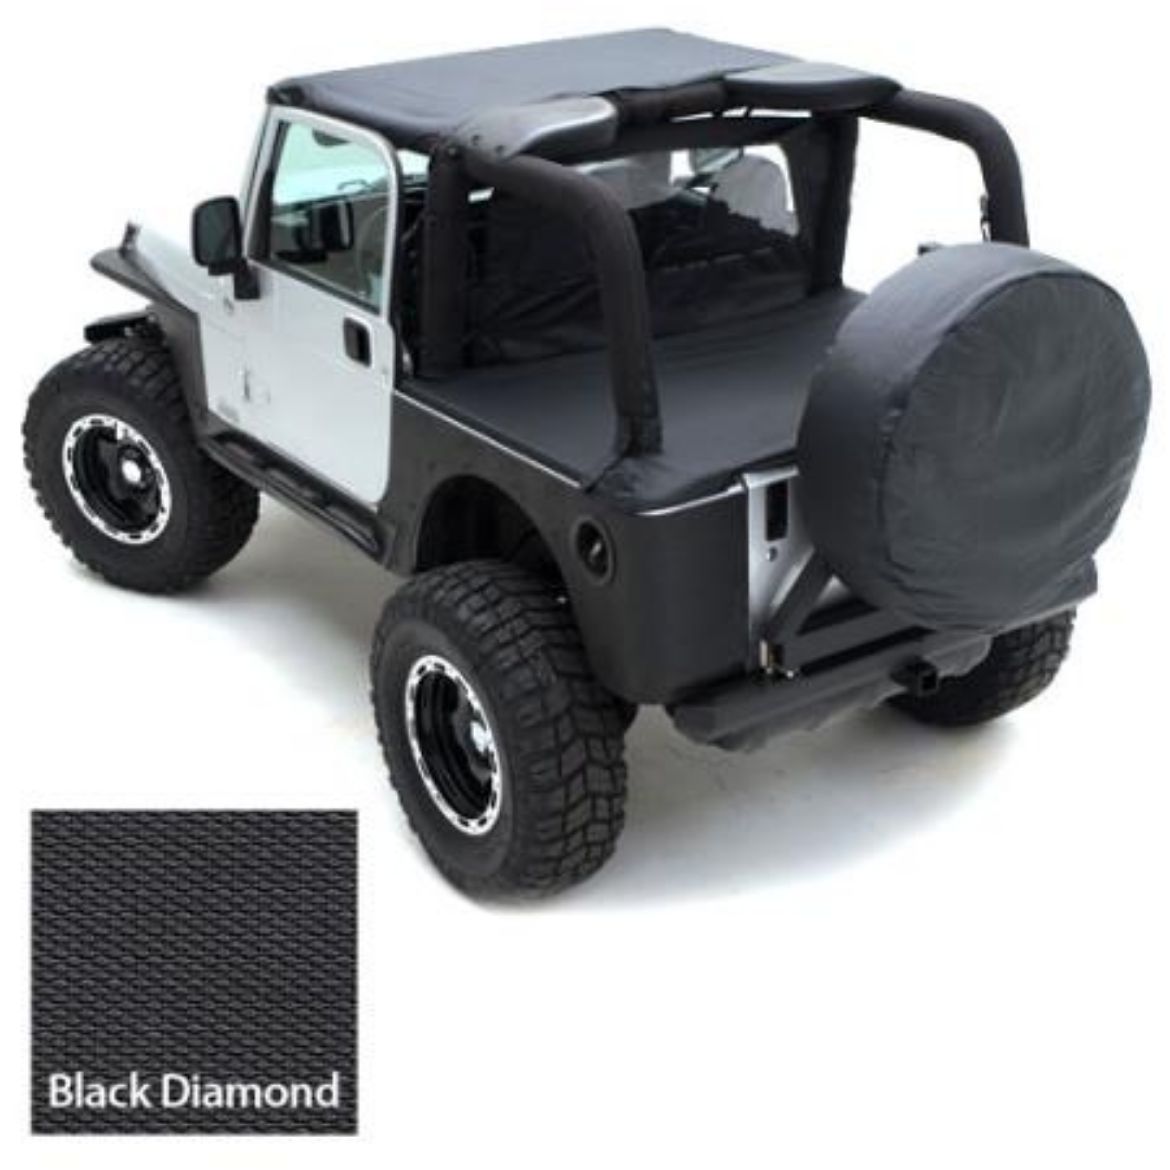 Picture of Tonneau Cover For OEM Soft Top W/Channel Mount 97-06 Wrangler TJ Not LJ Models Smittybilt